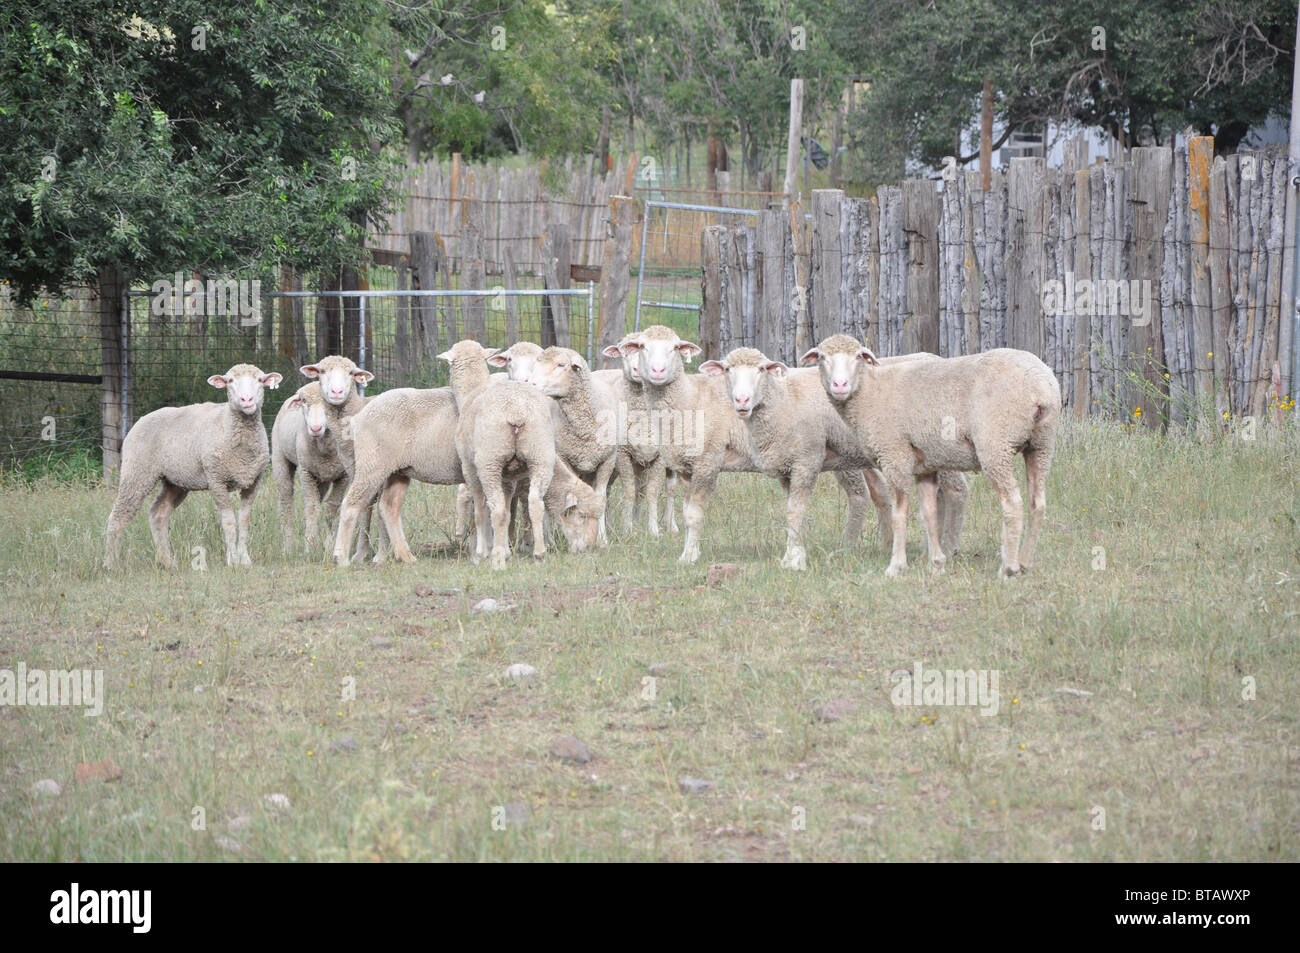 Sheep in rustic pen on West Texas ranch Stock Photo